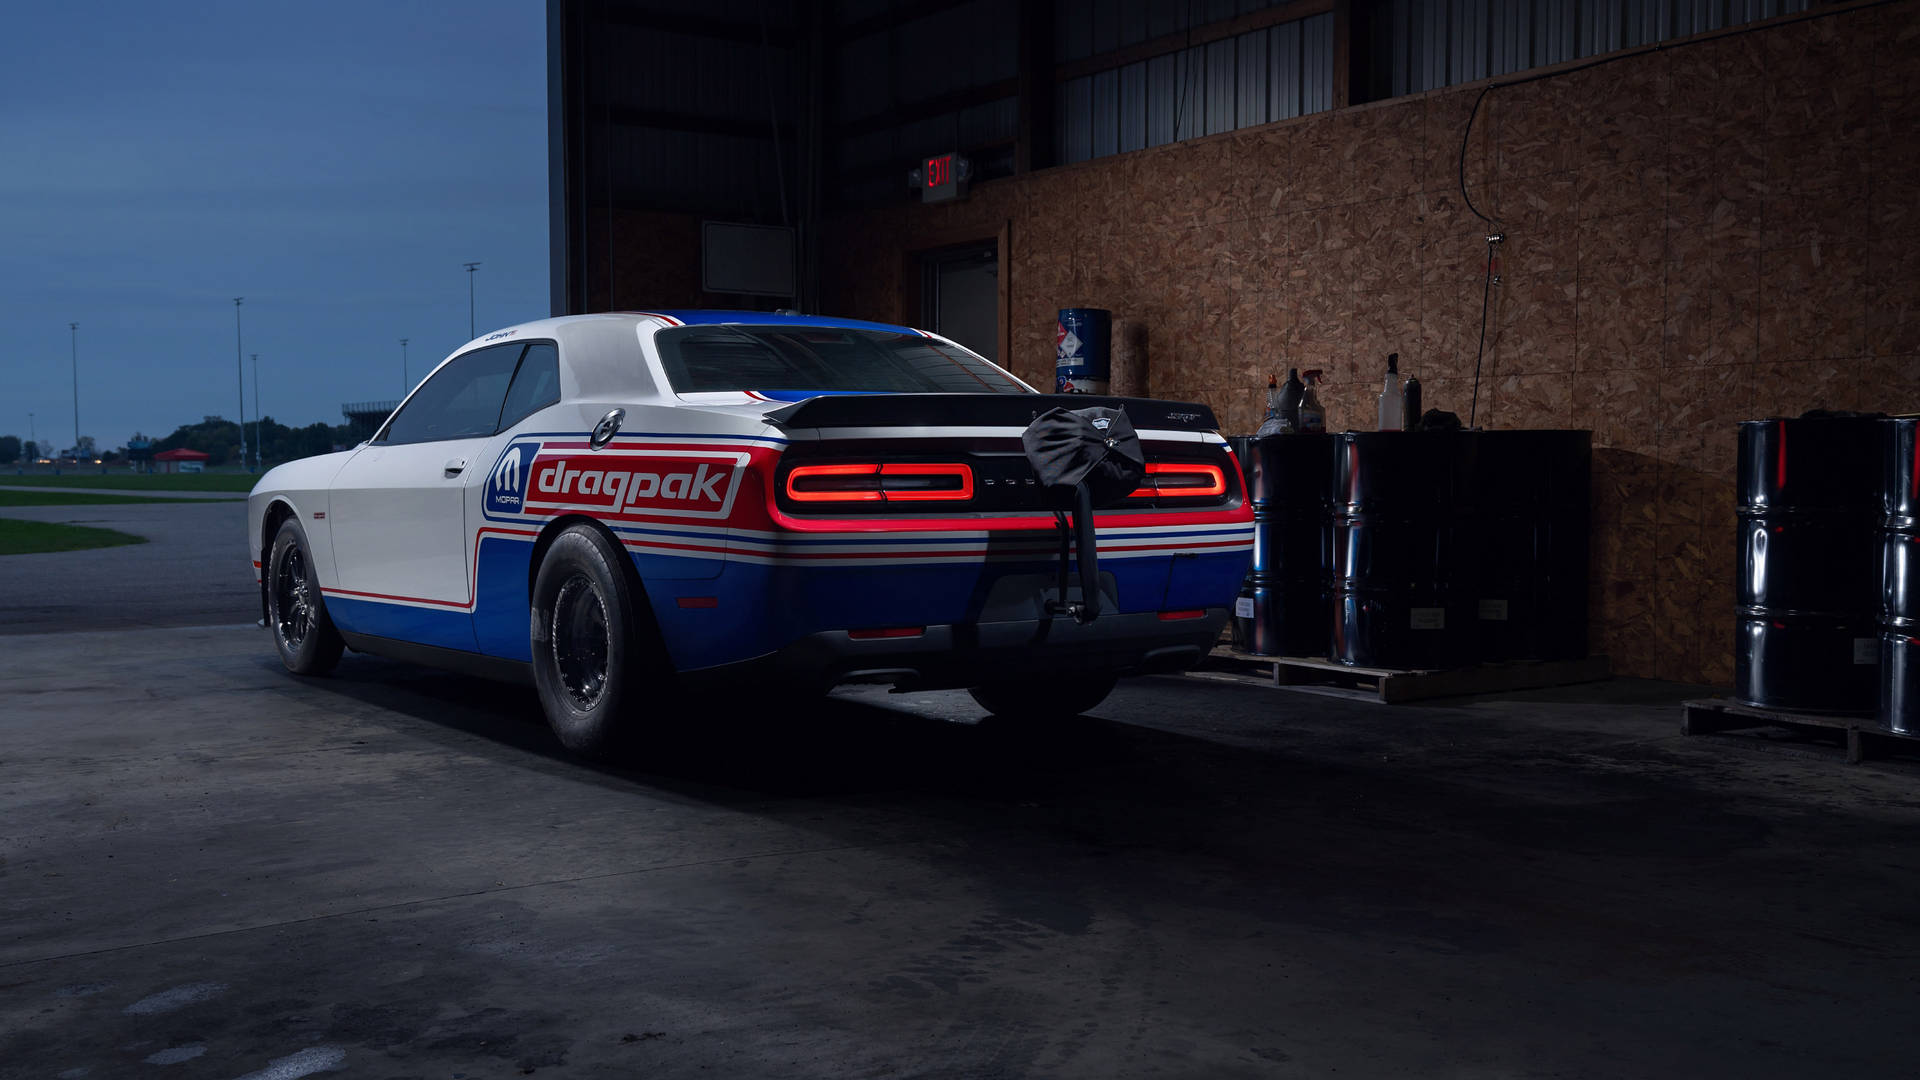 Dodge Challenger With Drag Pack Decal Background